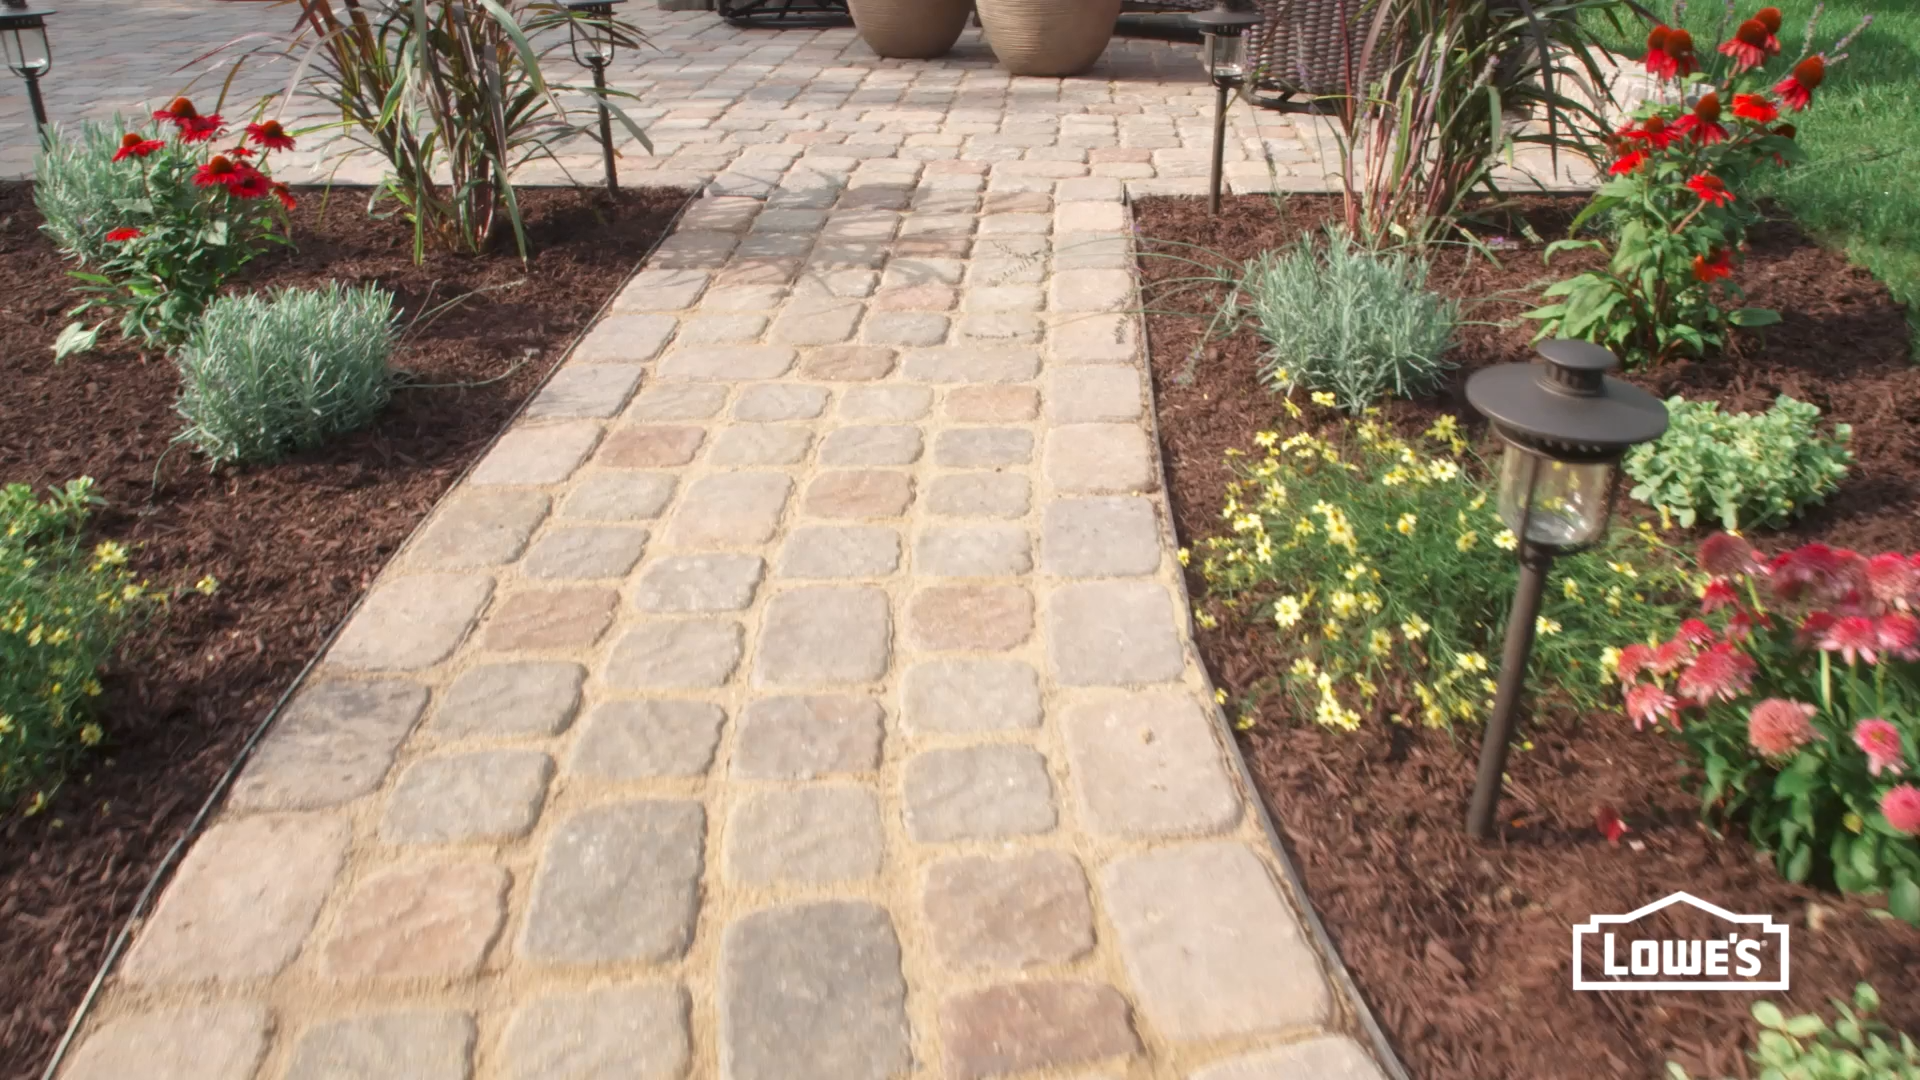 How to Design and Install a Paver Walkway -   diy Outdoor walkway